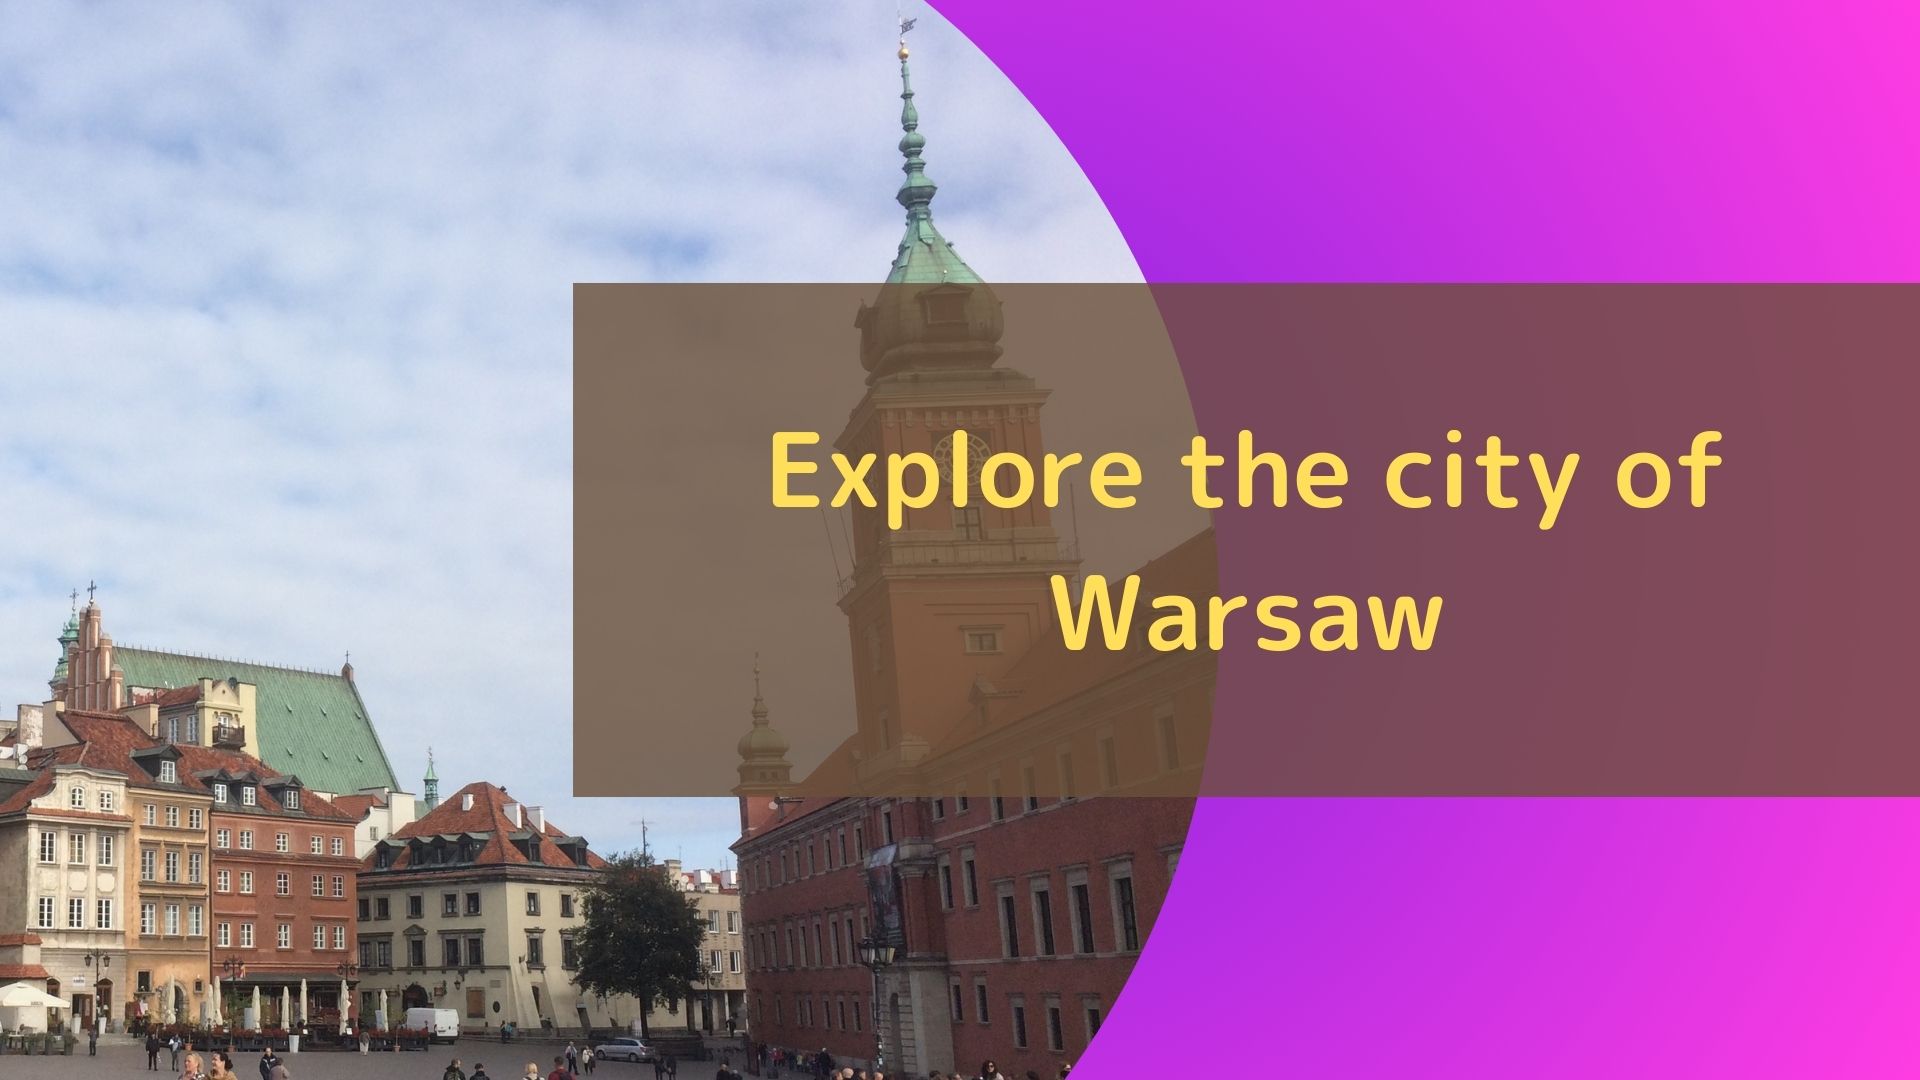 Explore the city of Warsaw